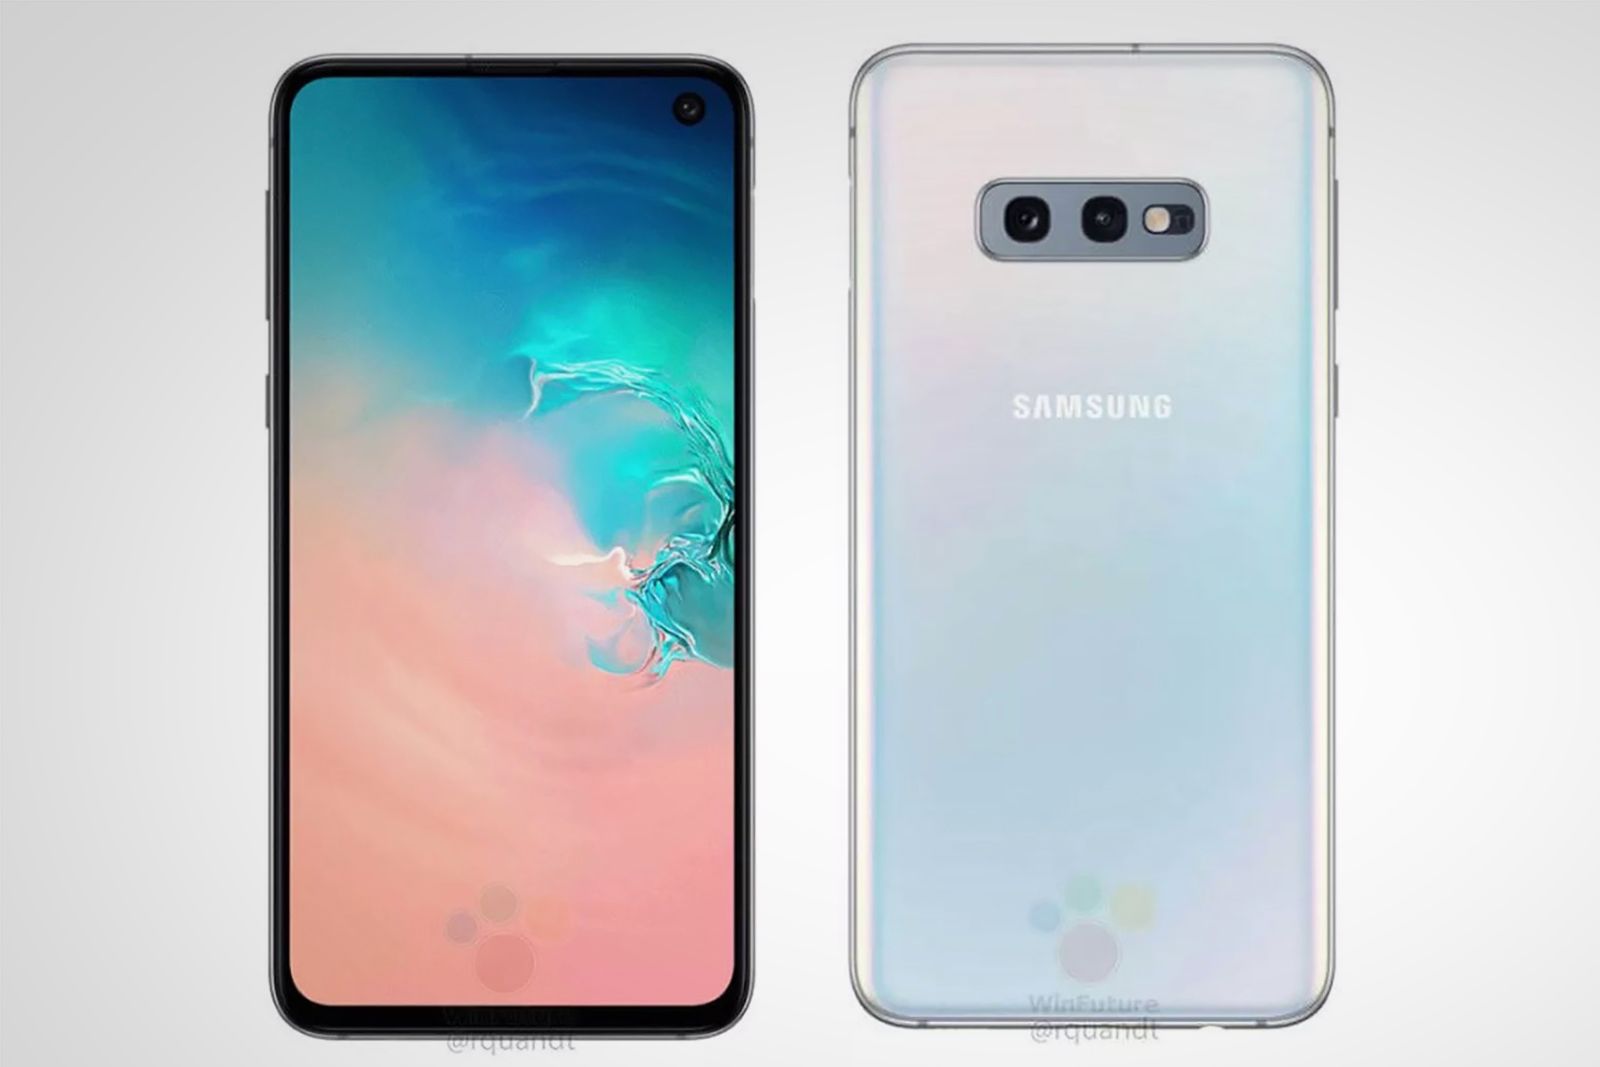 Samsung Galaxy S10e appears in several hands on pics image 1